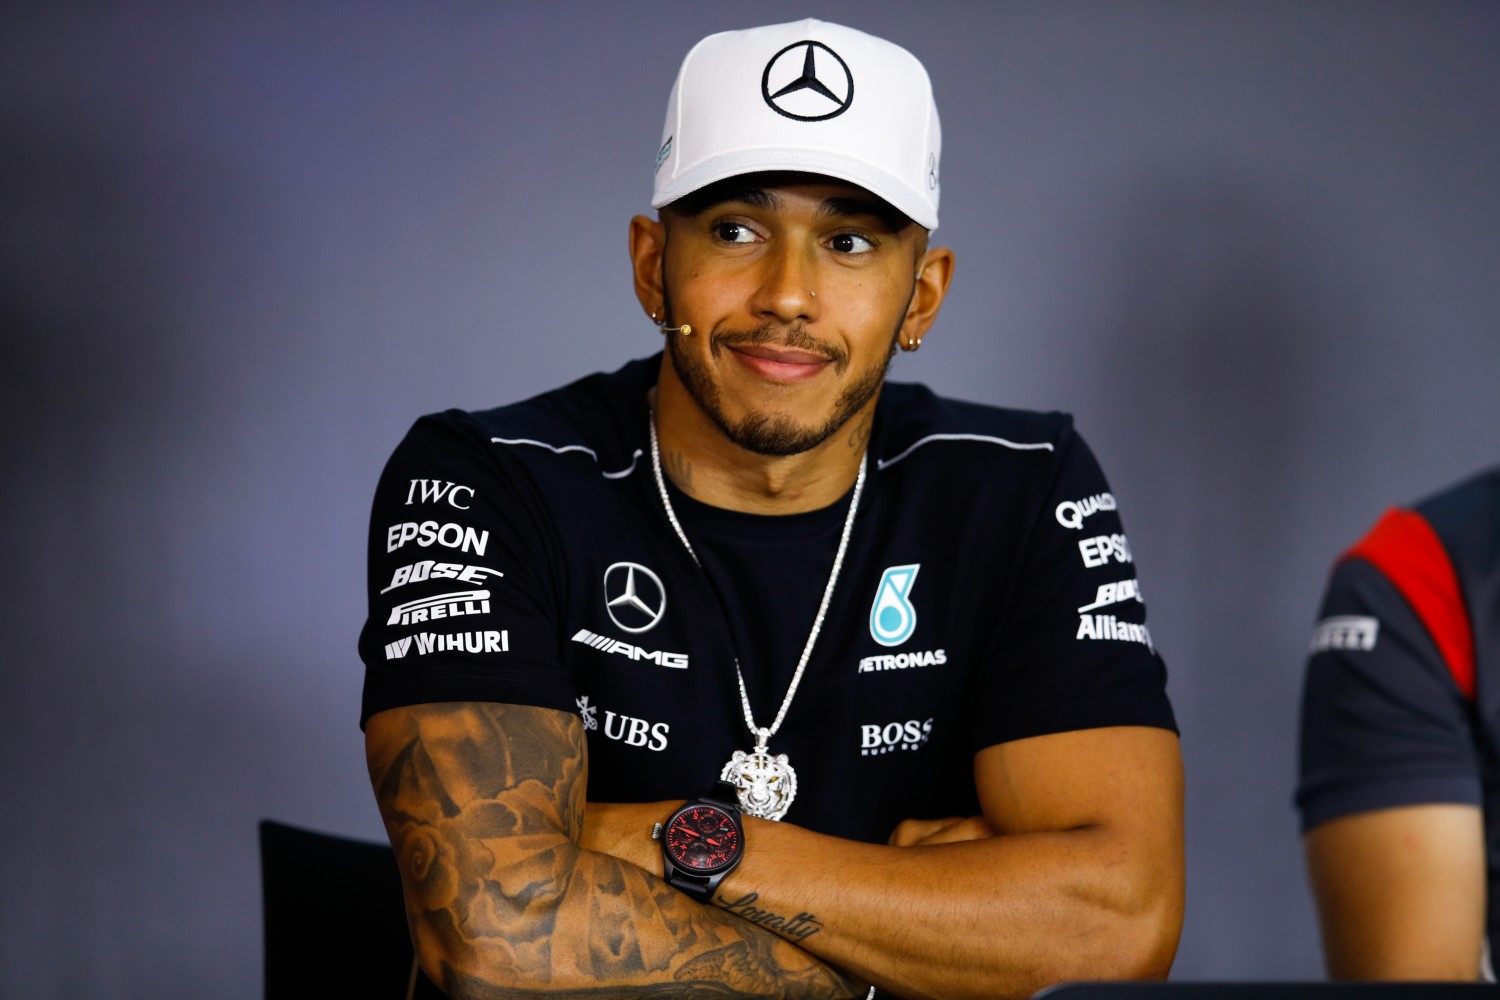 2018 F1 champion Lewis Hamilton. Let there be no doubt